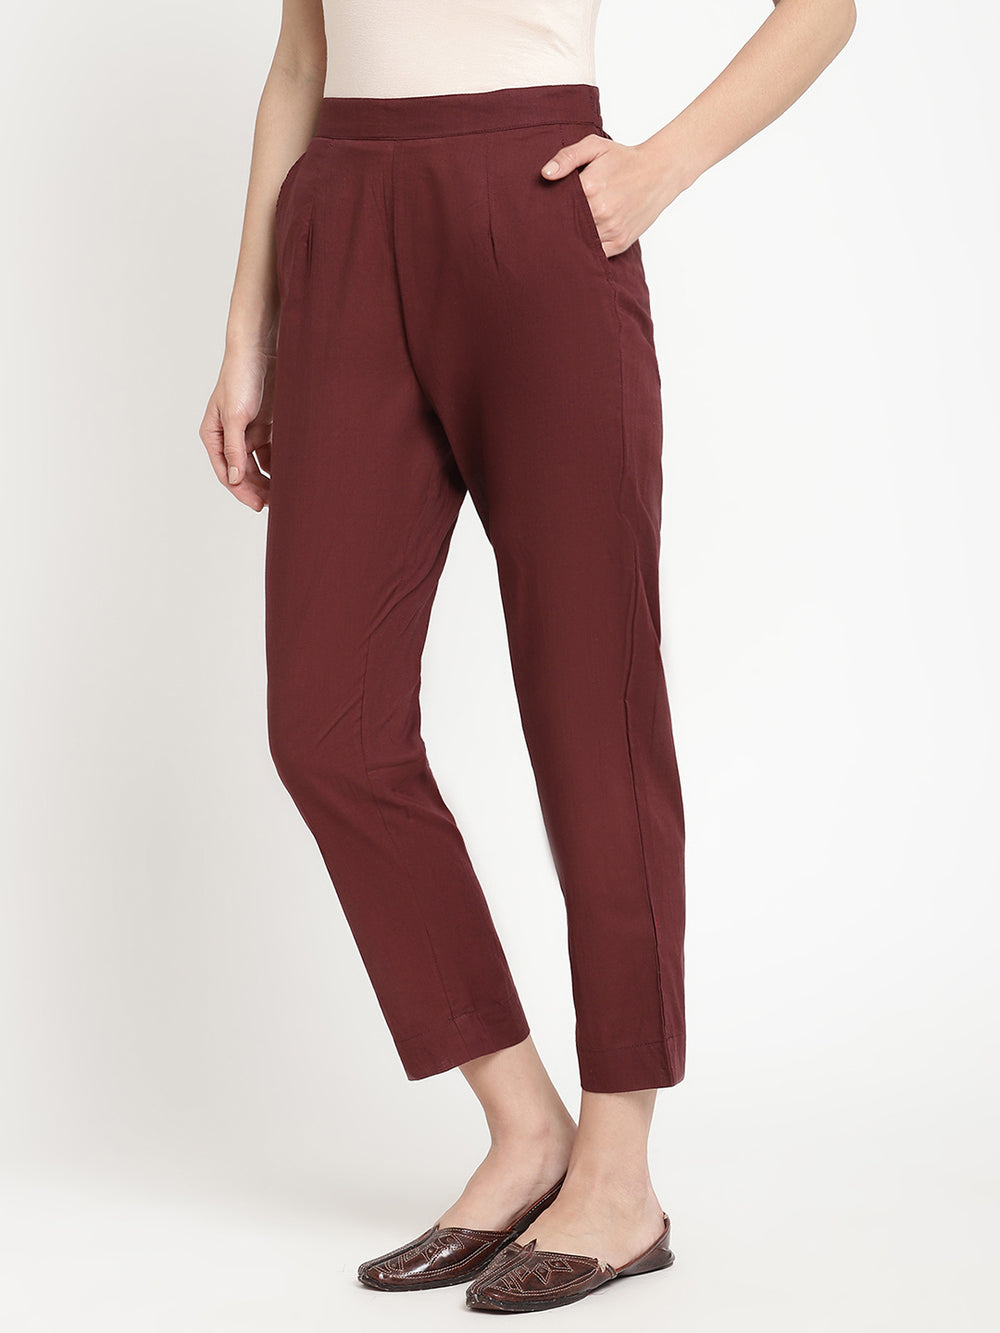 Model wearing straight-fit maroon cotton pants. 